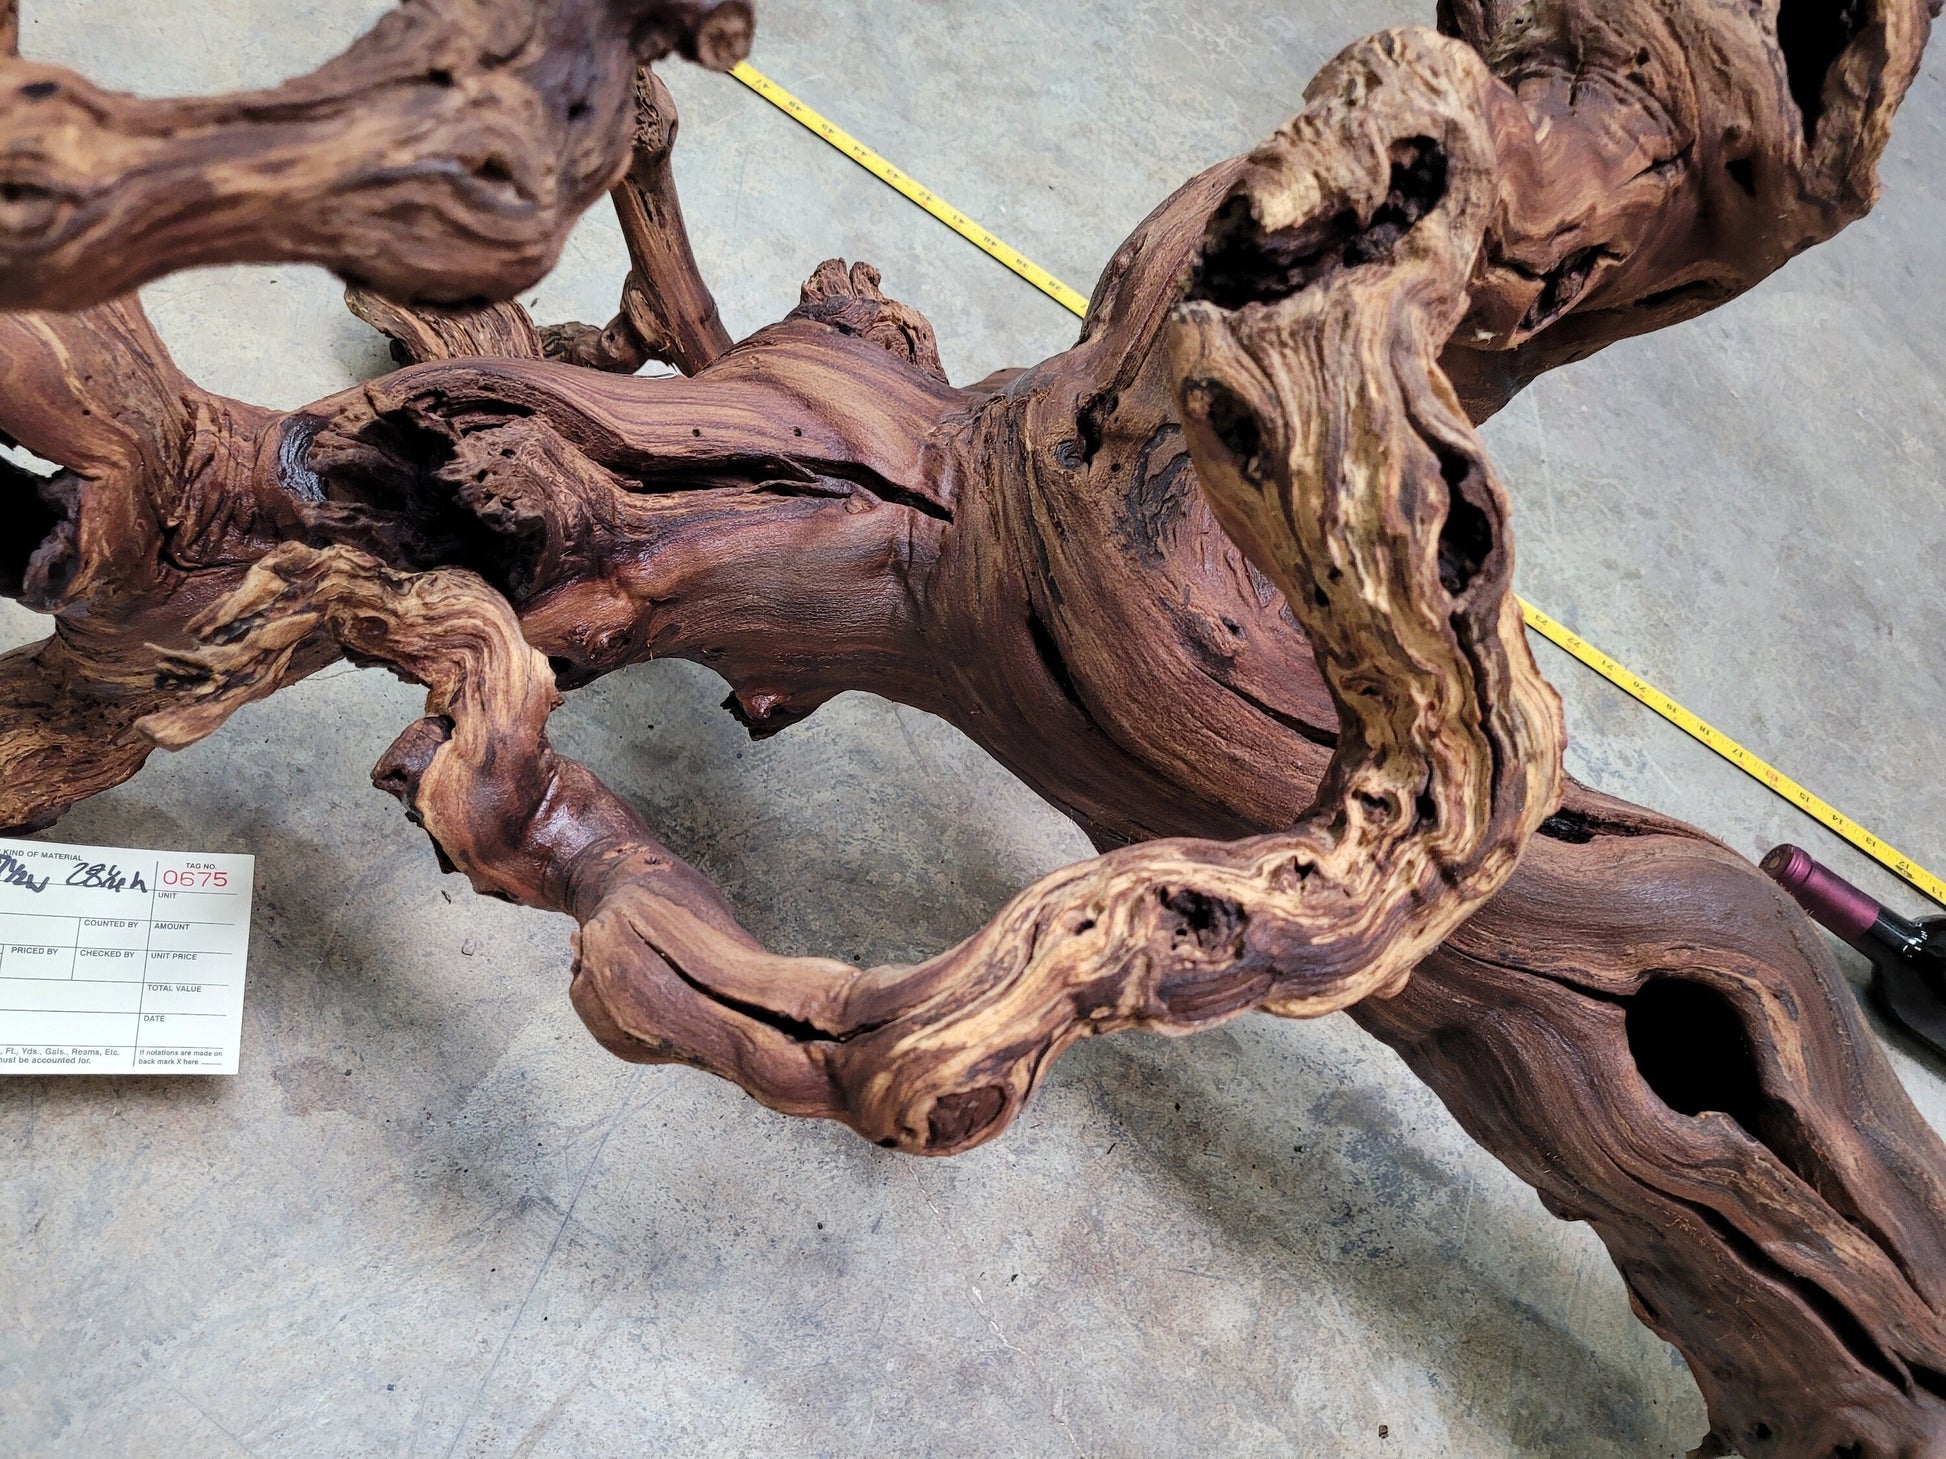 Grape Vine Art From Silver Oak 0675 made from retired Napa Zinfandel grapevine 100% Recycled + Ready to Ship!